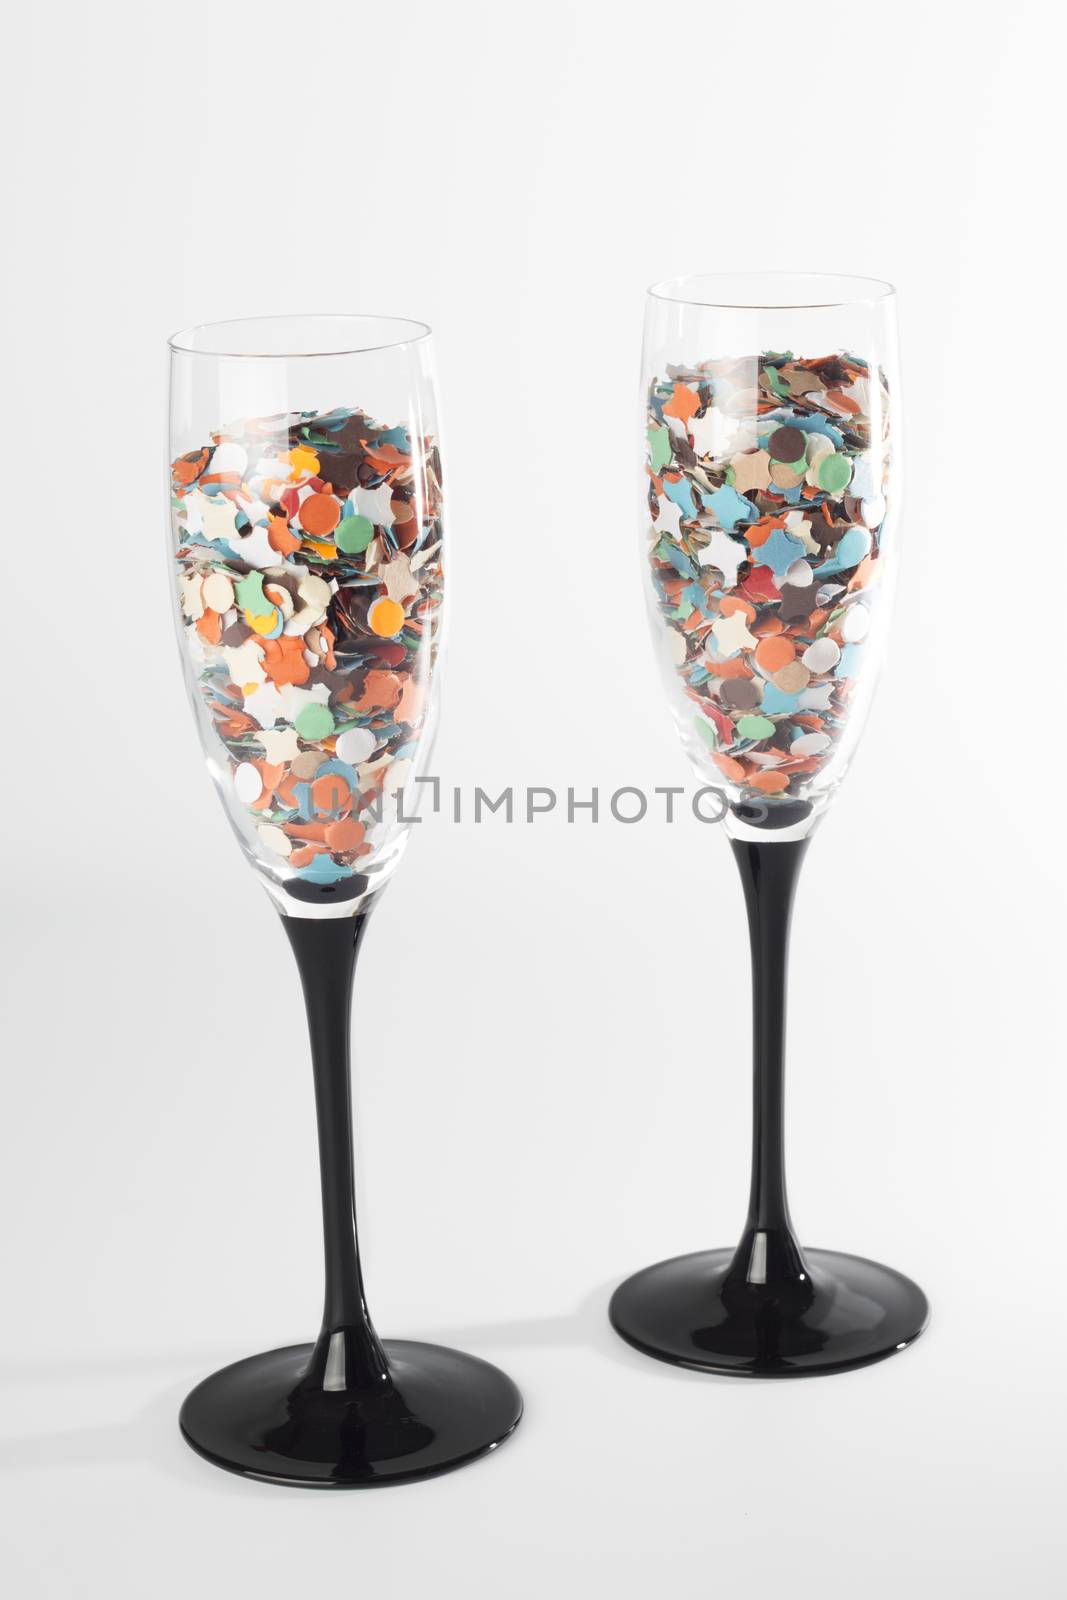 Champaign glasses with confetti, isolated by avanheertum